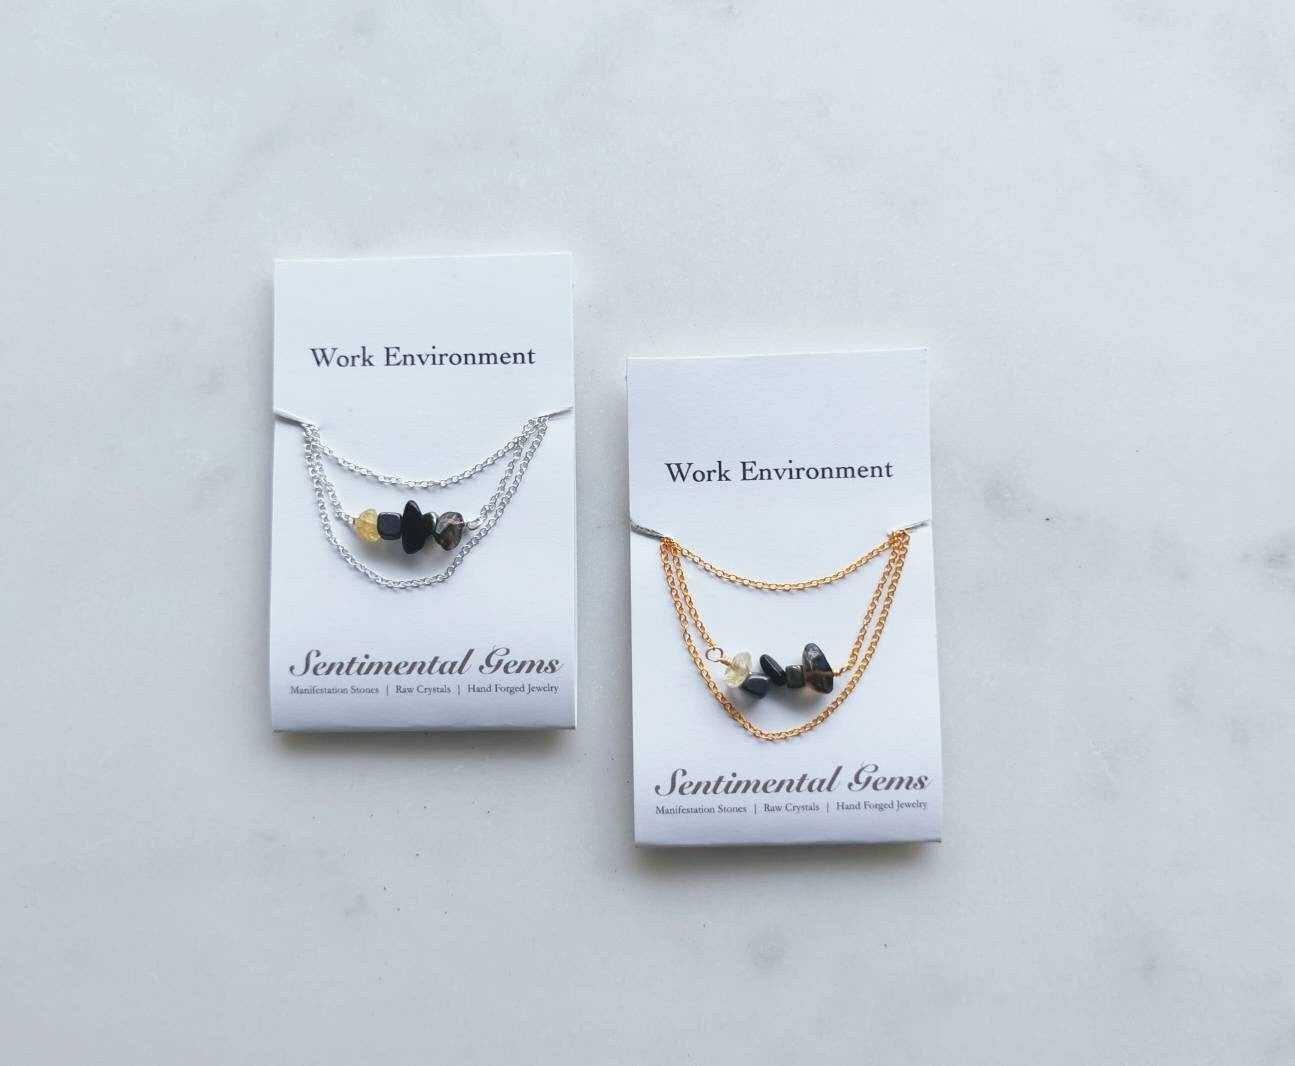 Affirmation Crystal Necklace for a Positive Work Environment